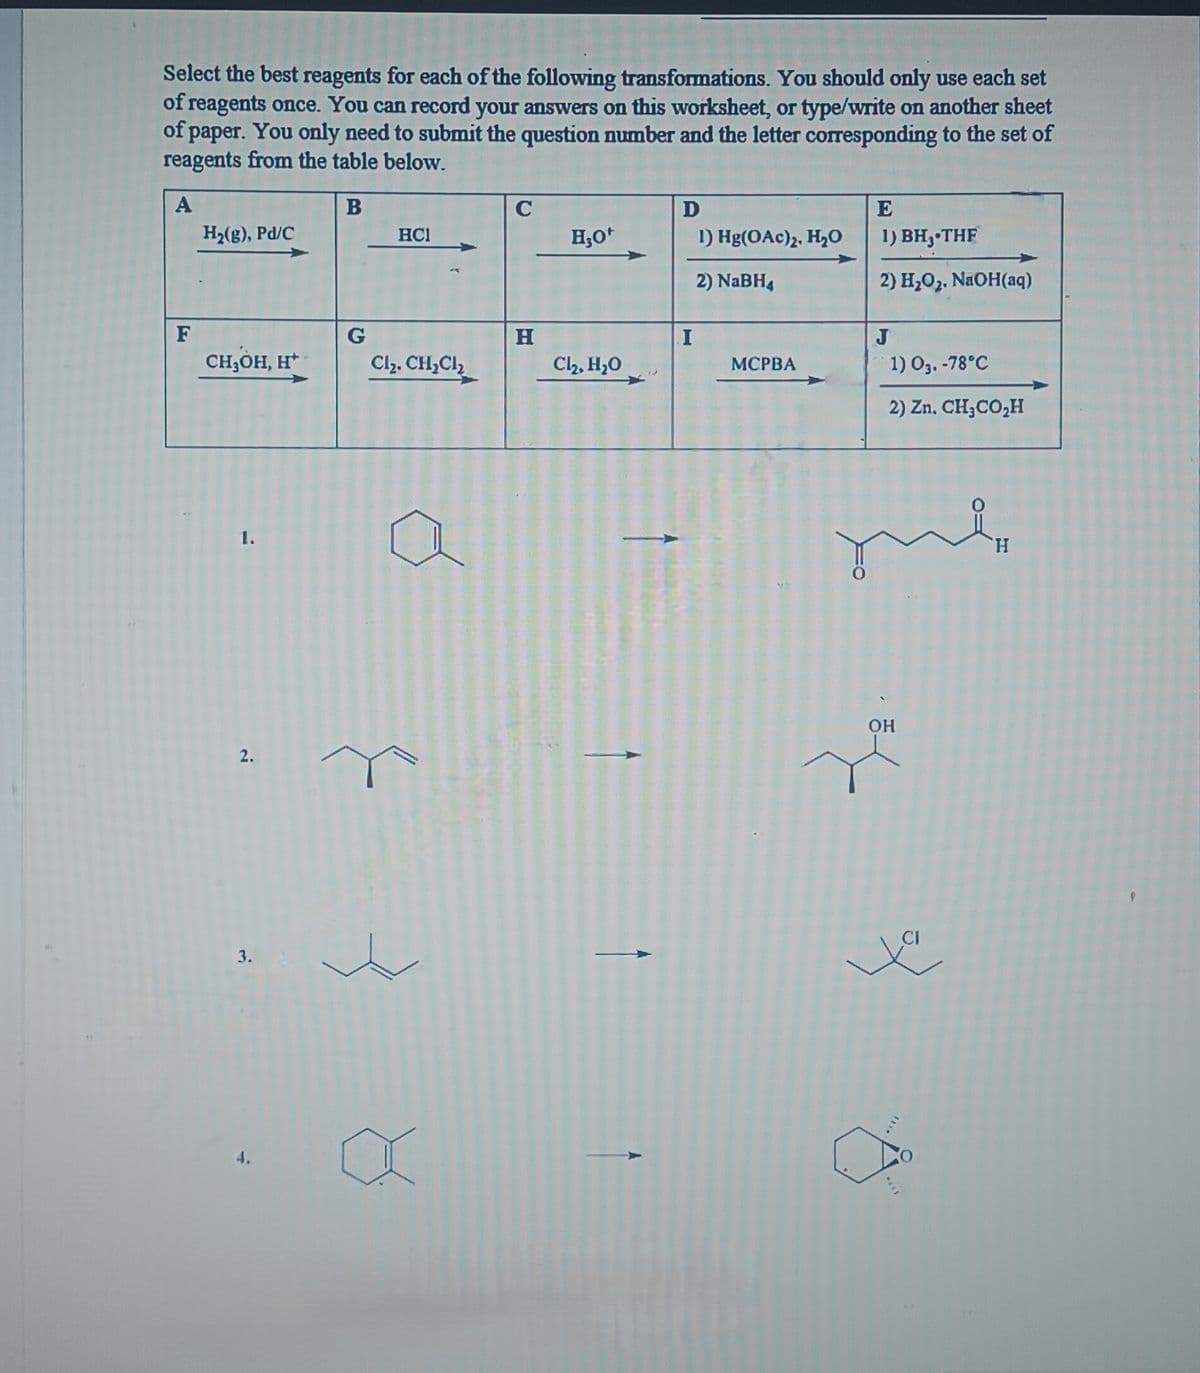 Select the best reagents for each of the following transformations. You should only use each set
of reagents once. You can record your answers on this worksheet, or type/write on another sheet
of paper. You only need to submit the question number and the letter corresponding to the set of
reagents from the table below.
A
B
F
H₂(g), Pd/C
CH,OH, H*
1.
2.
3.
4.
G
HC1
Cl₂, CH₂Cl₂
C
H
H₂O*
Cl₂, H₂O
D
I
1) Hg(OAc)2, H₂O
2) NaBH4
MCPBA
E
1) BH, THF
2) H₂O₂. NaOH(aq)
J
1) 03.-78°C
2) Zn. CH₂CO₂H
OH
H